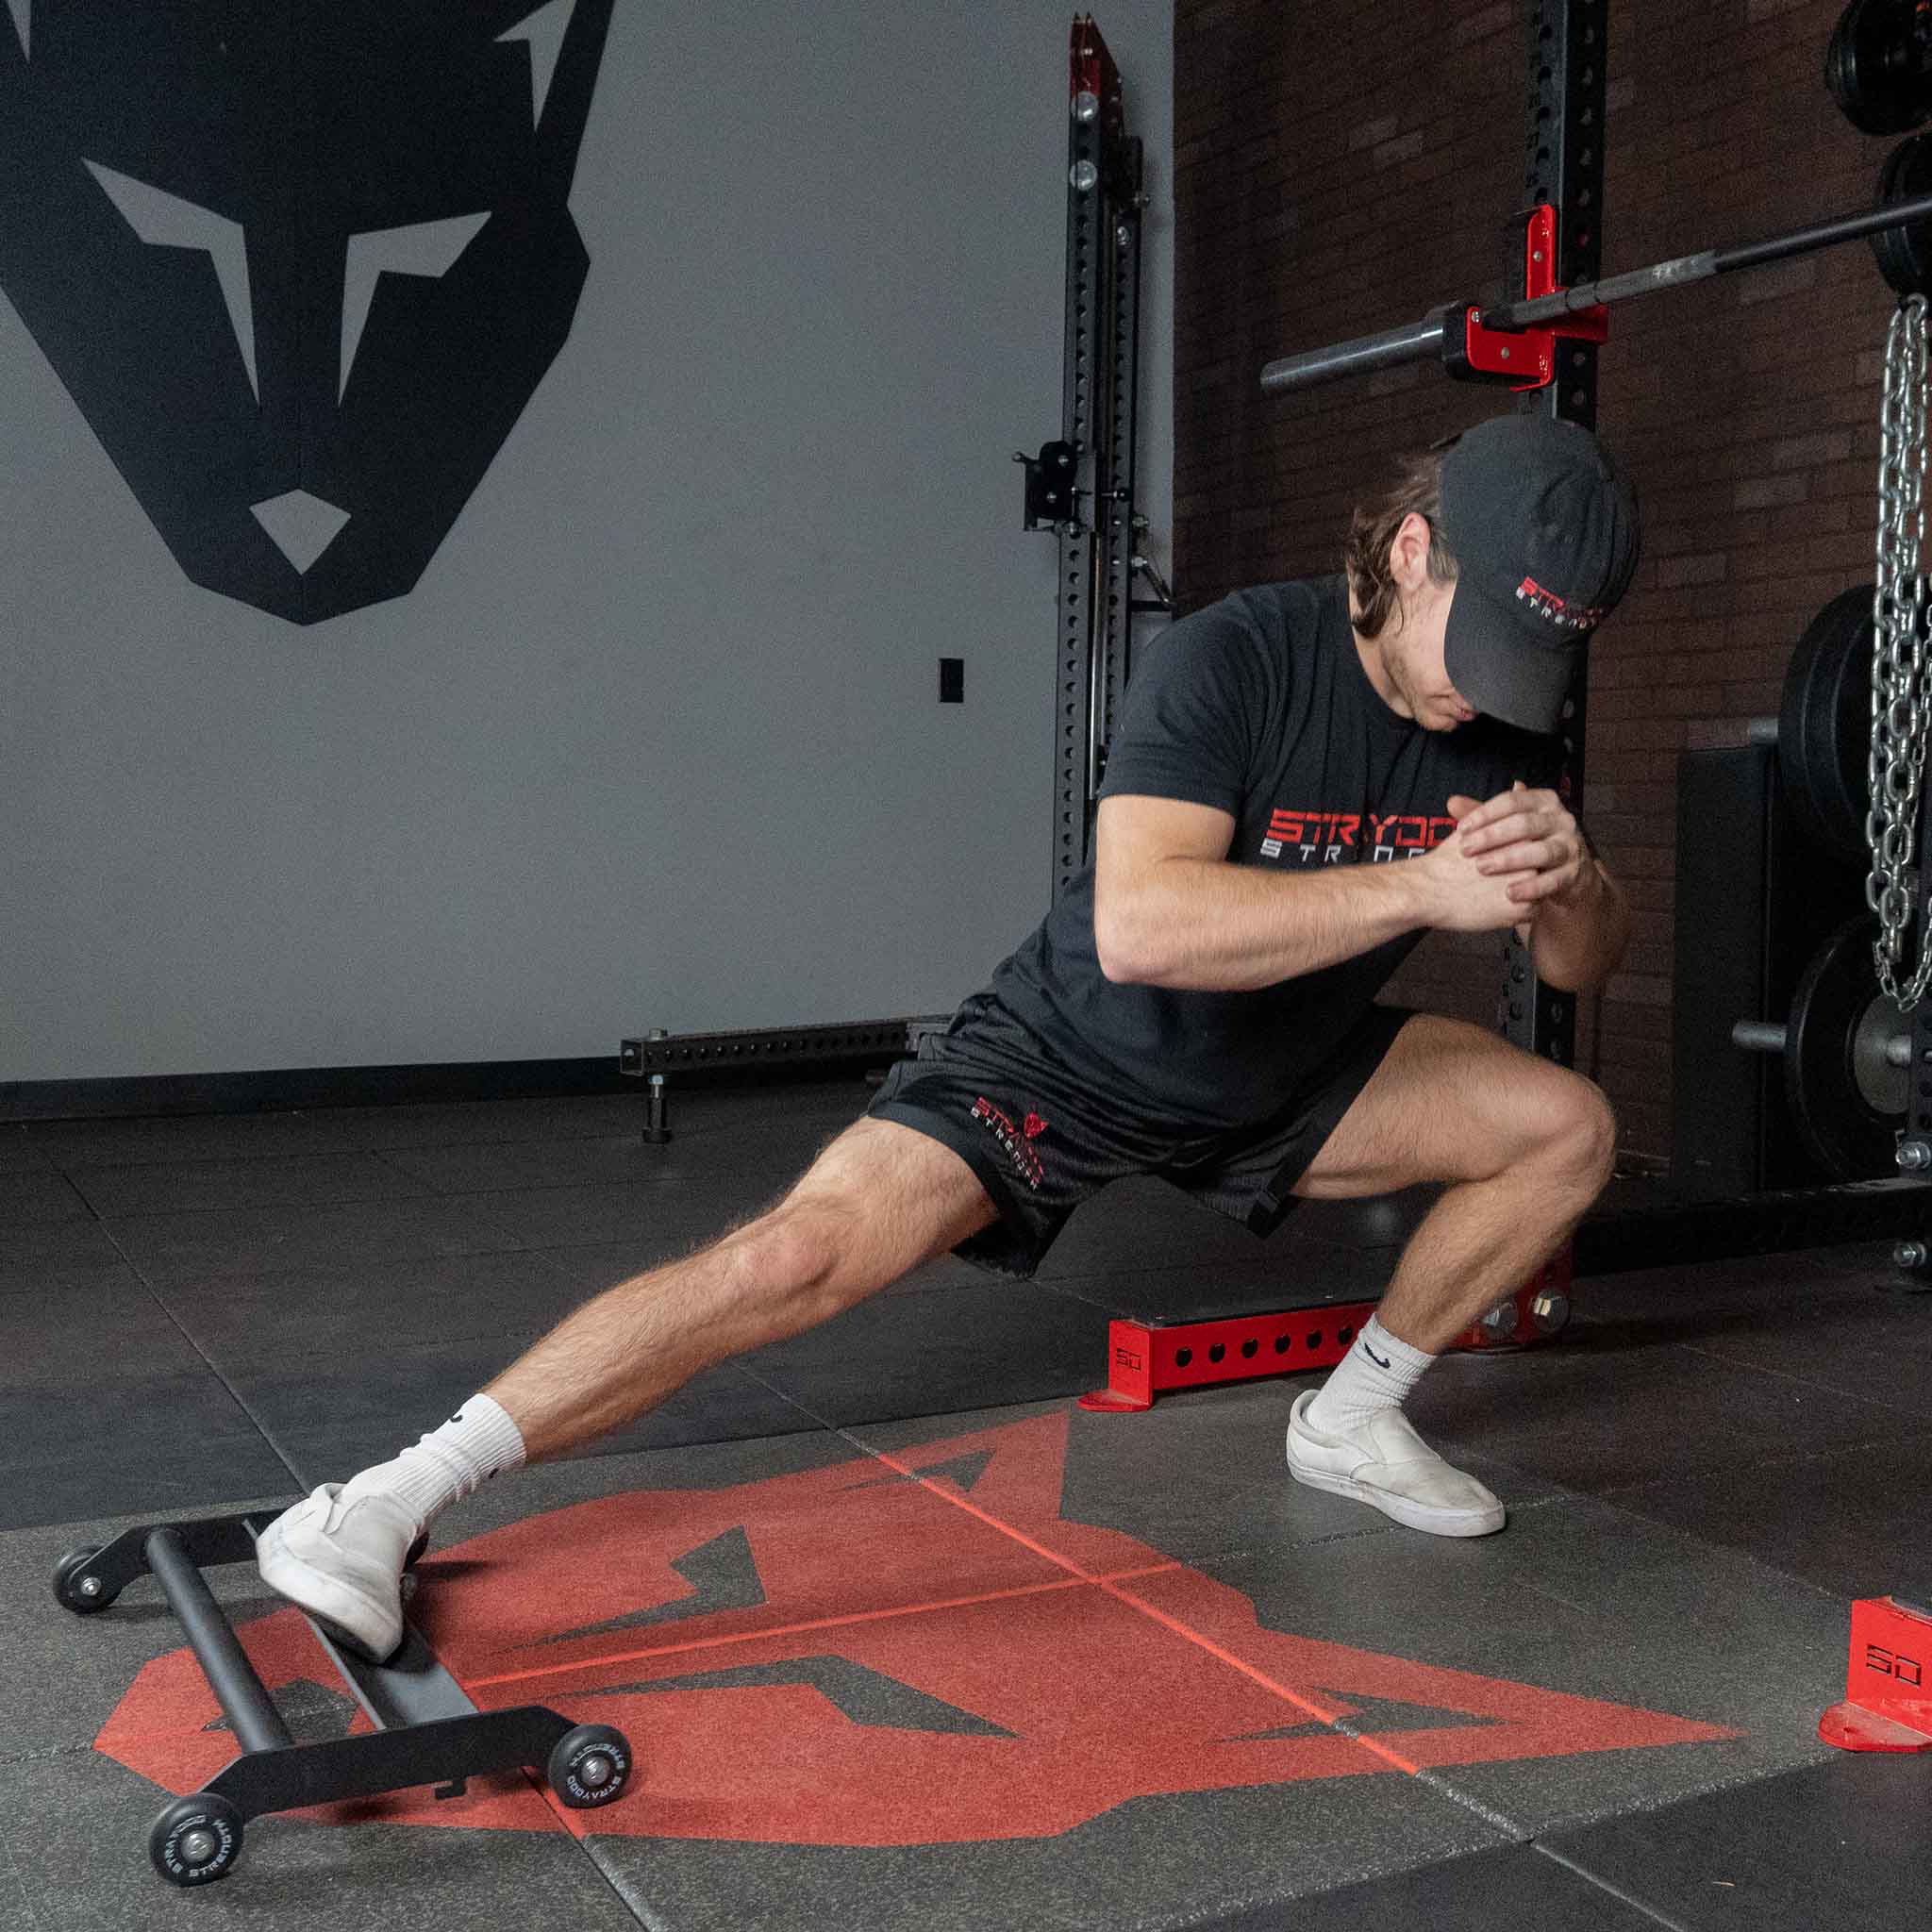 lateral lunge